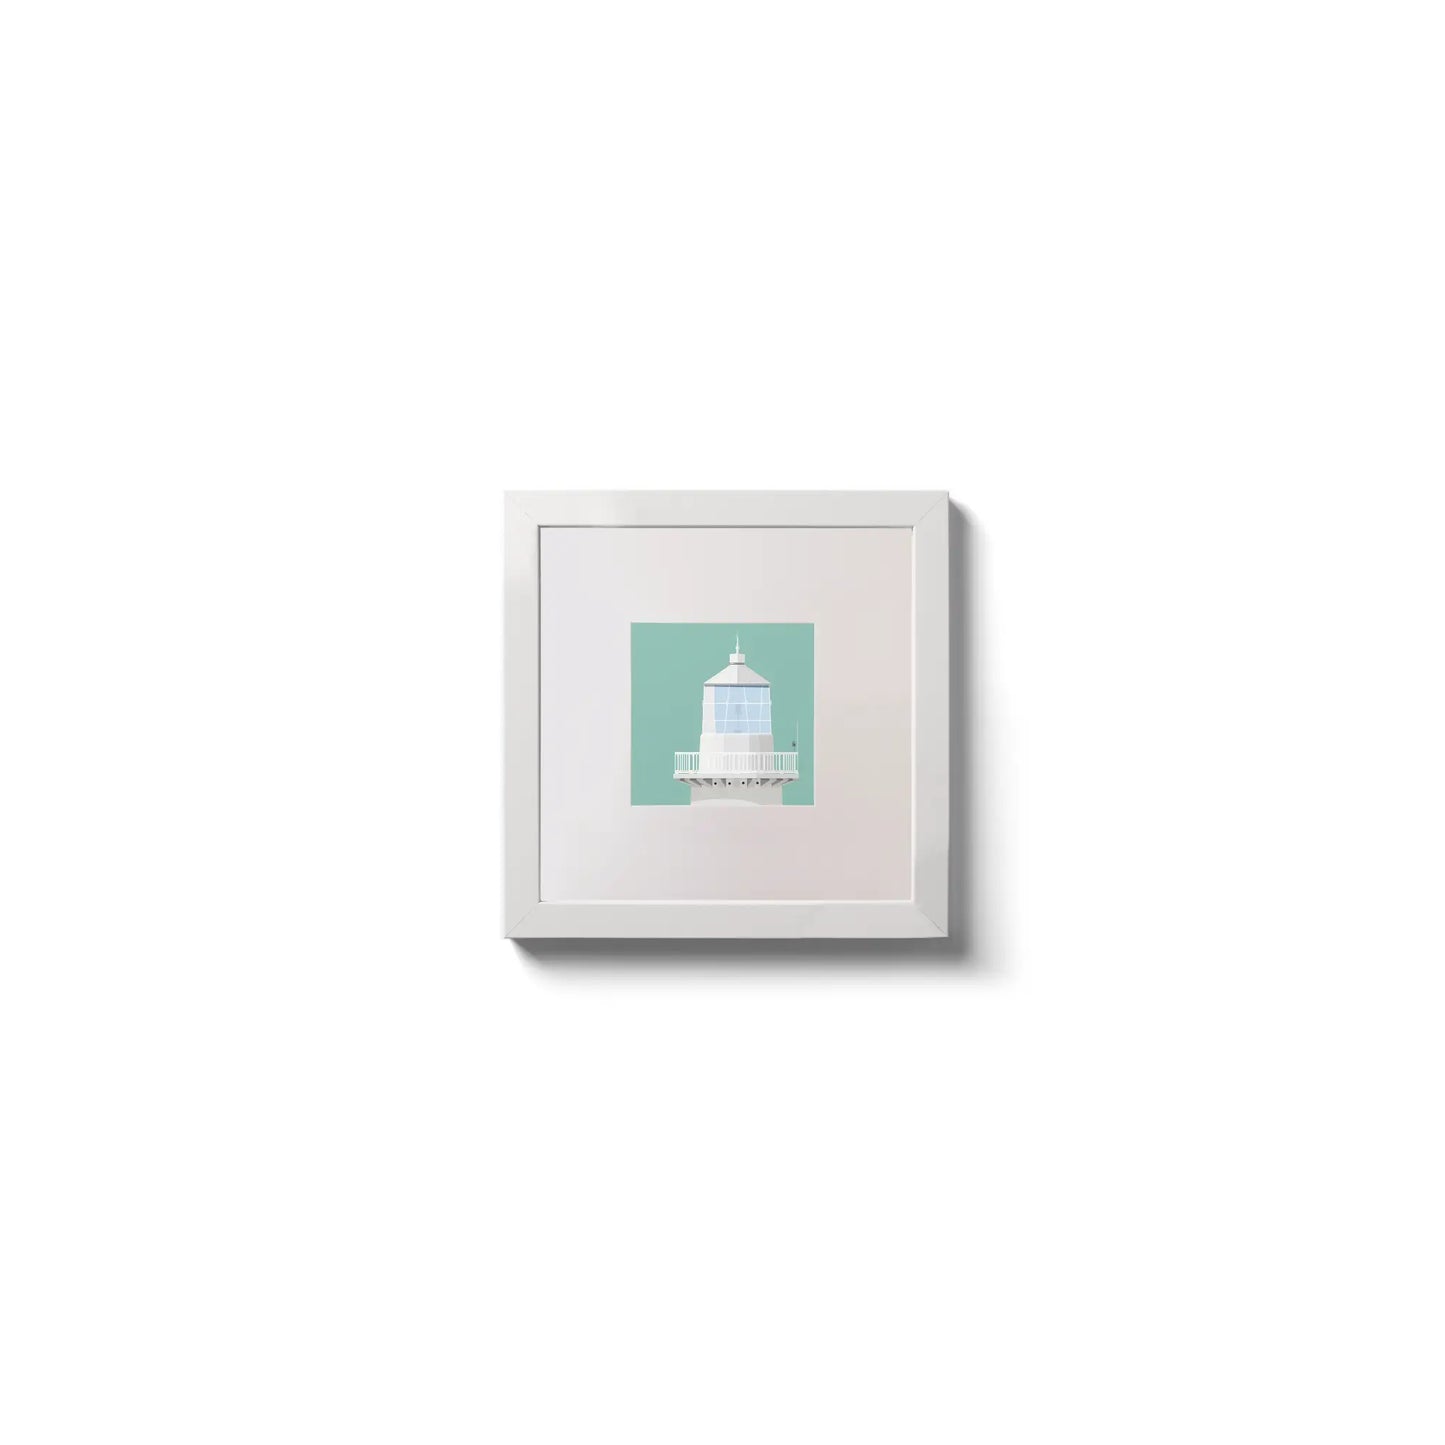 Illustration Eeragh lighthouse on an ocean green background,  in a white square frame measuring 10x10cm.